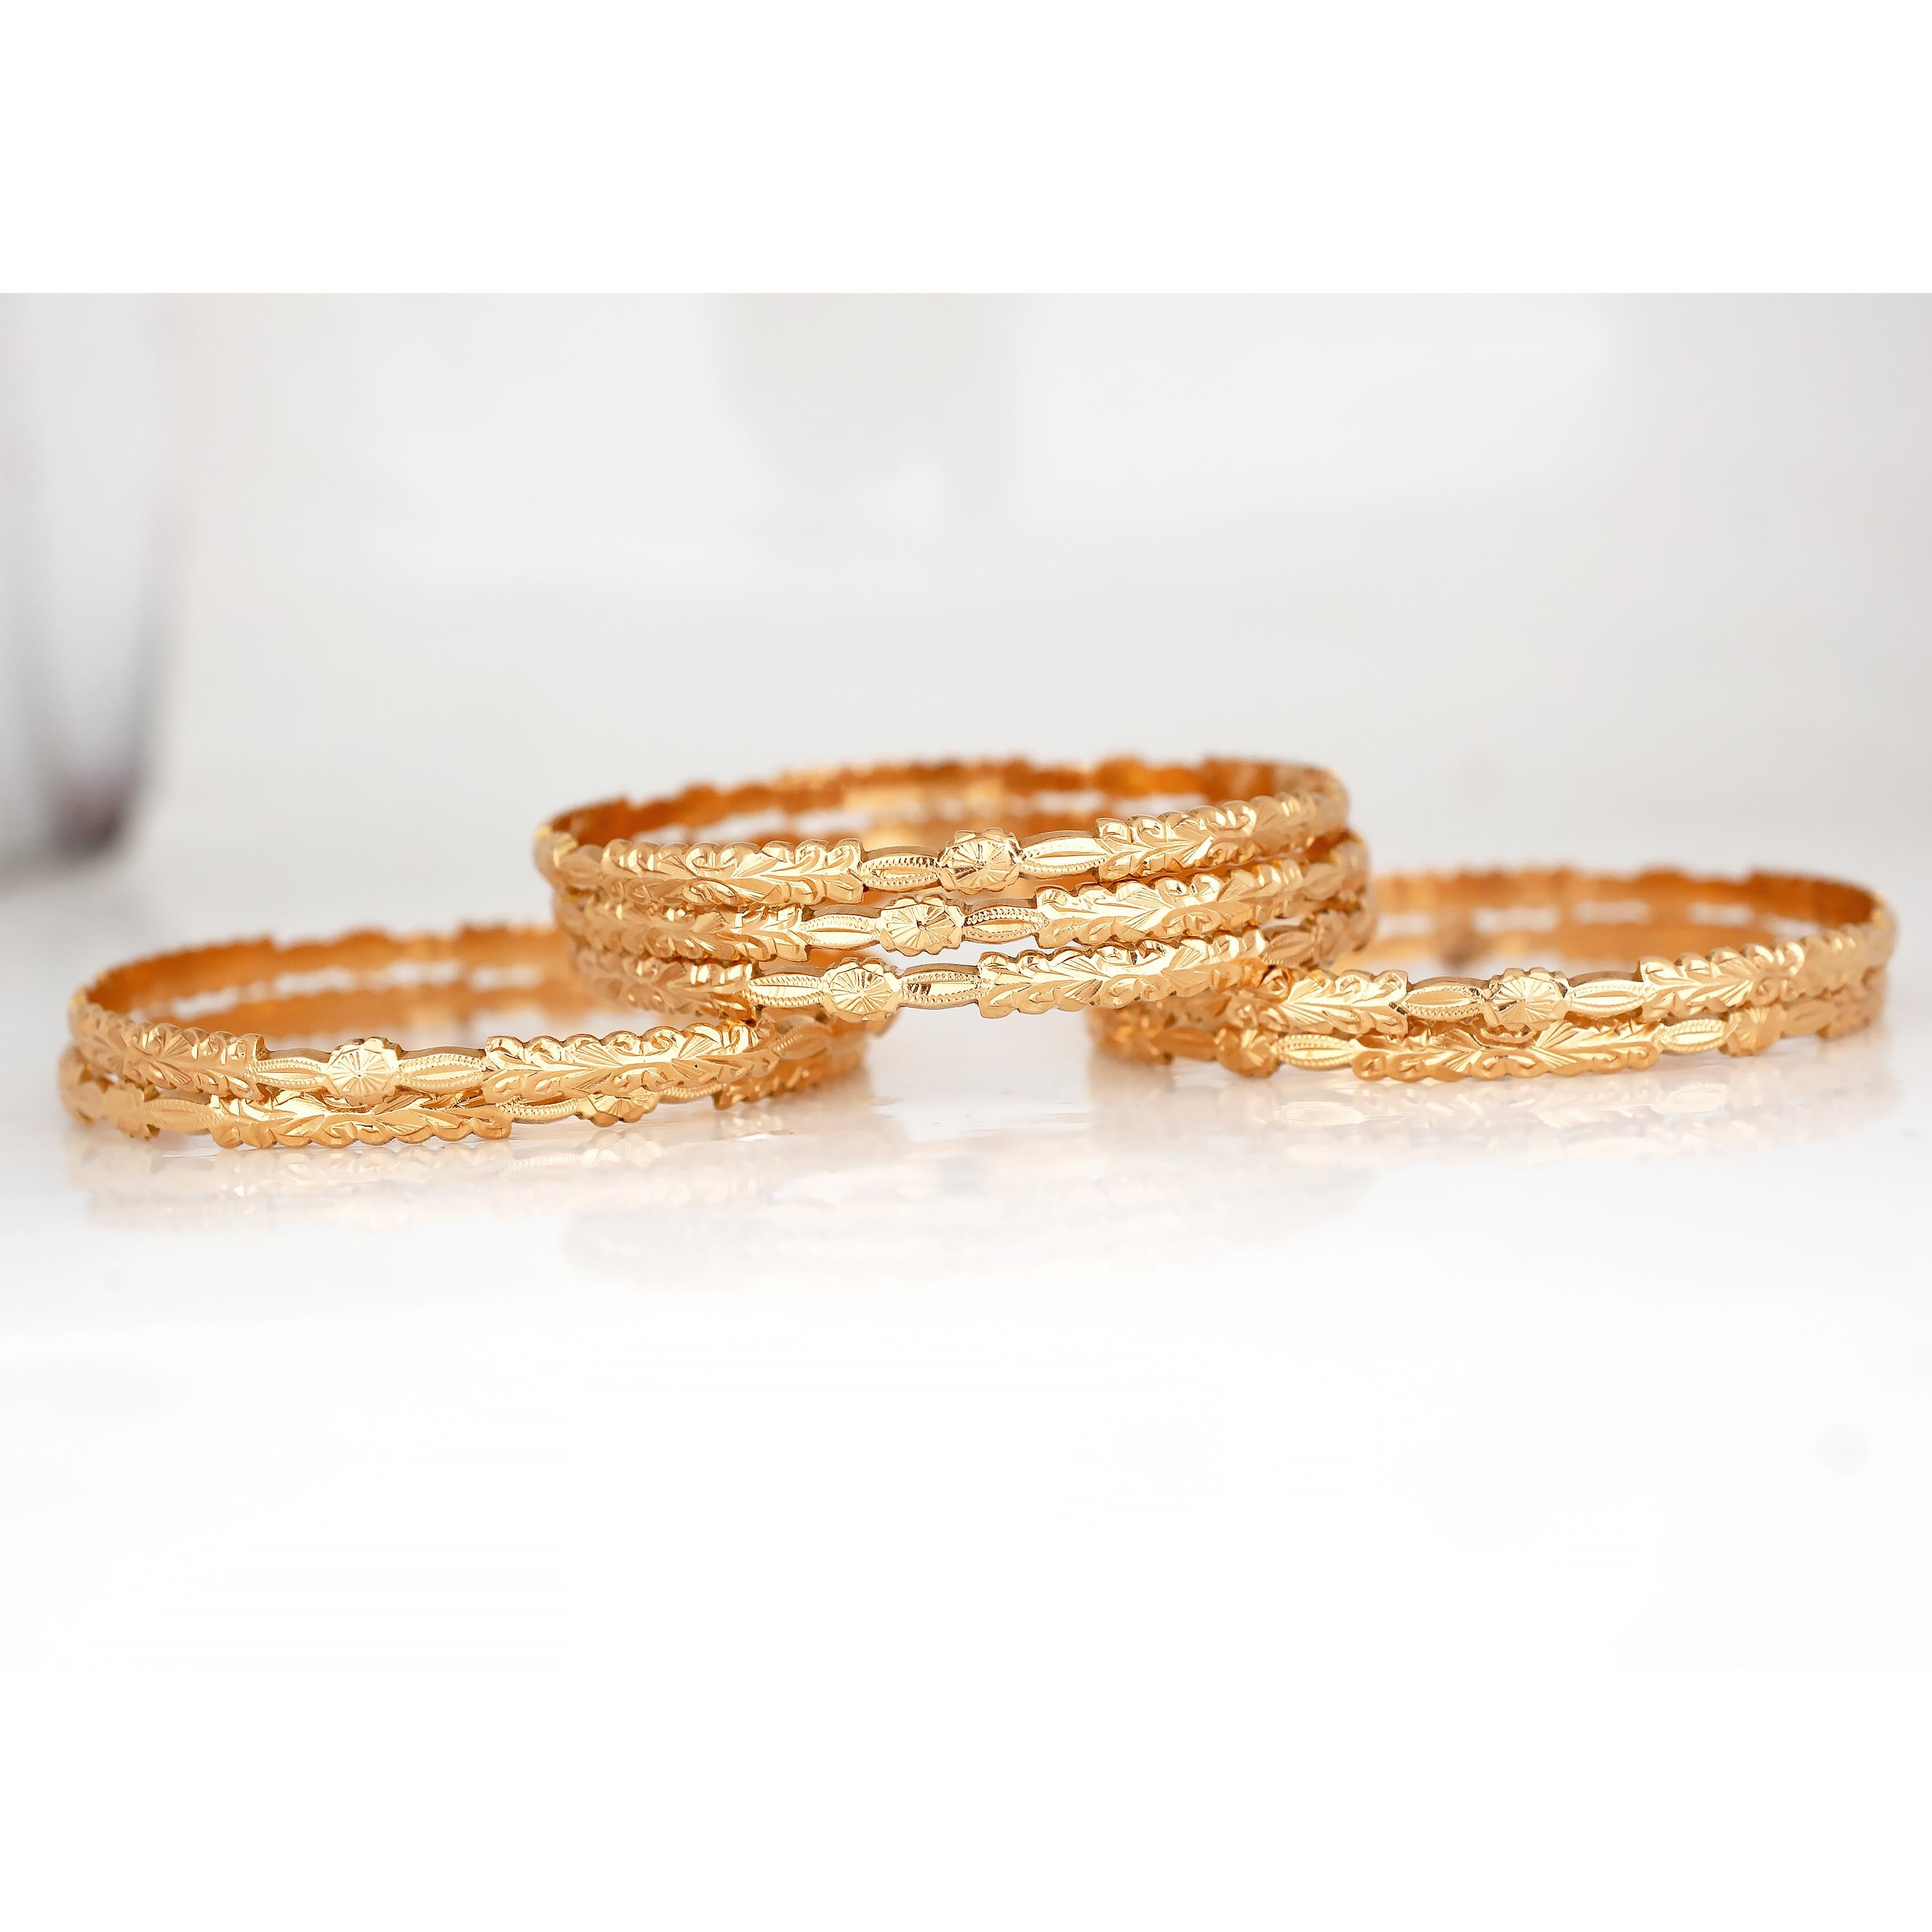 This lovely set of 7  hand engraved floral design bangle bracelets date from the Victorian period and have  beautiful look and are in great condition. The bracelets are tested at 18k Yellow Gold and 
 weigh in at 99.7 Grams. The bracelets have a